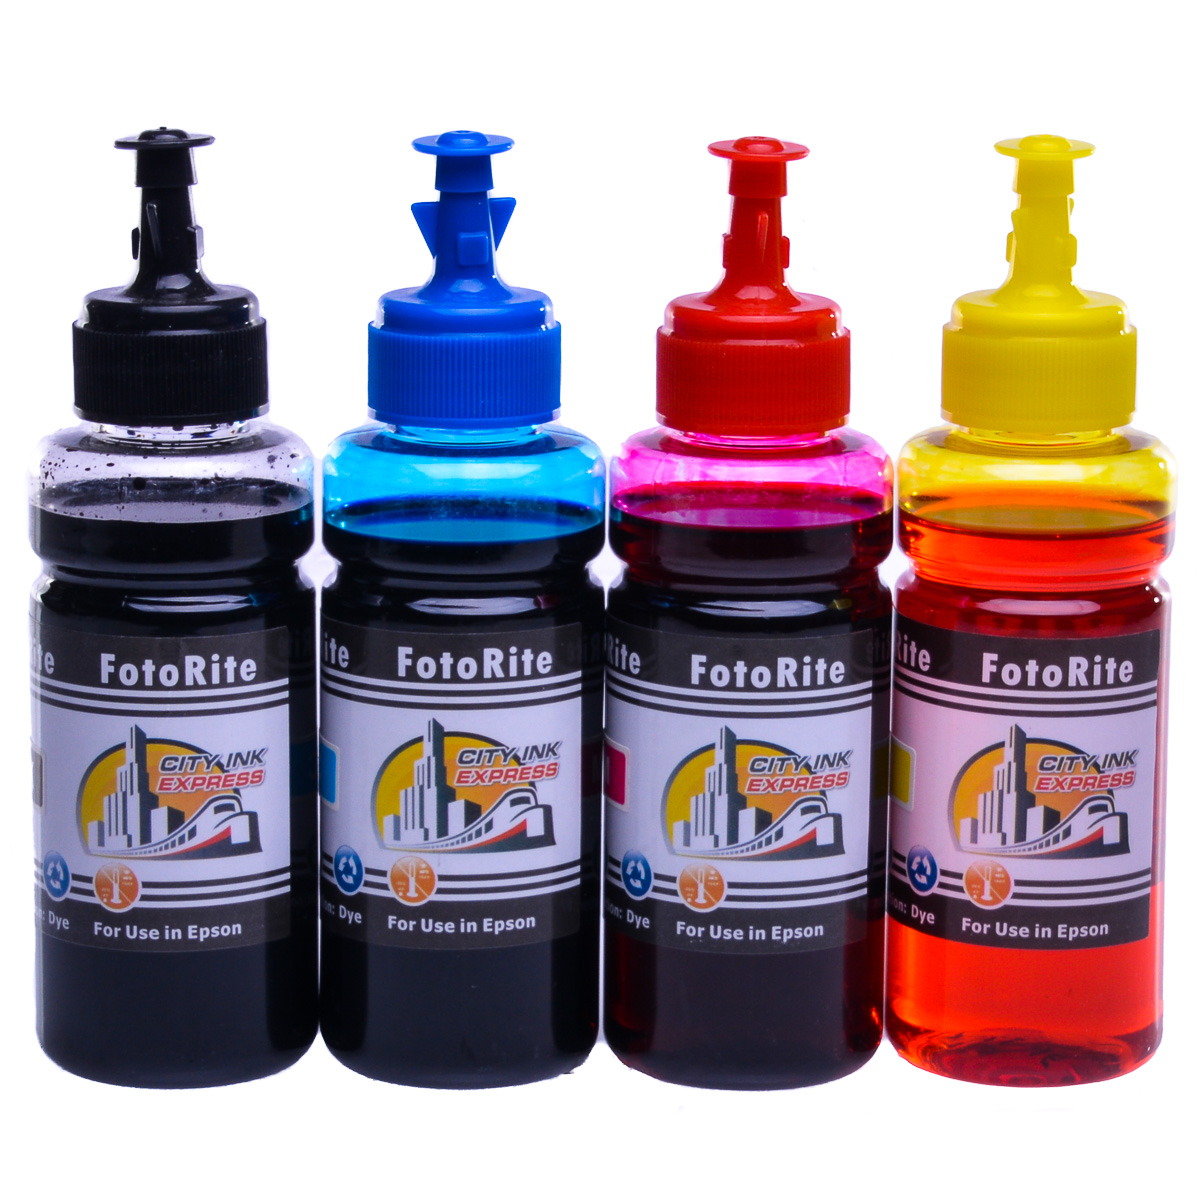 Cheap Multipack dye ink refill replaces Epson ET-2820